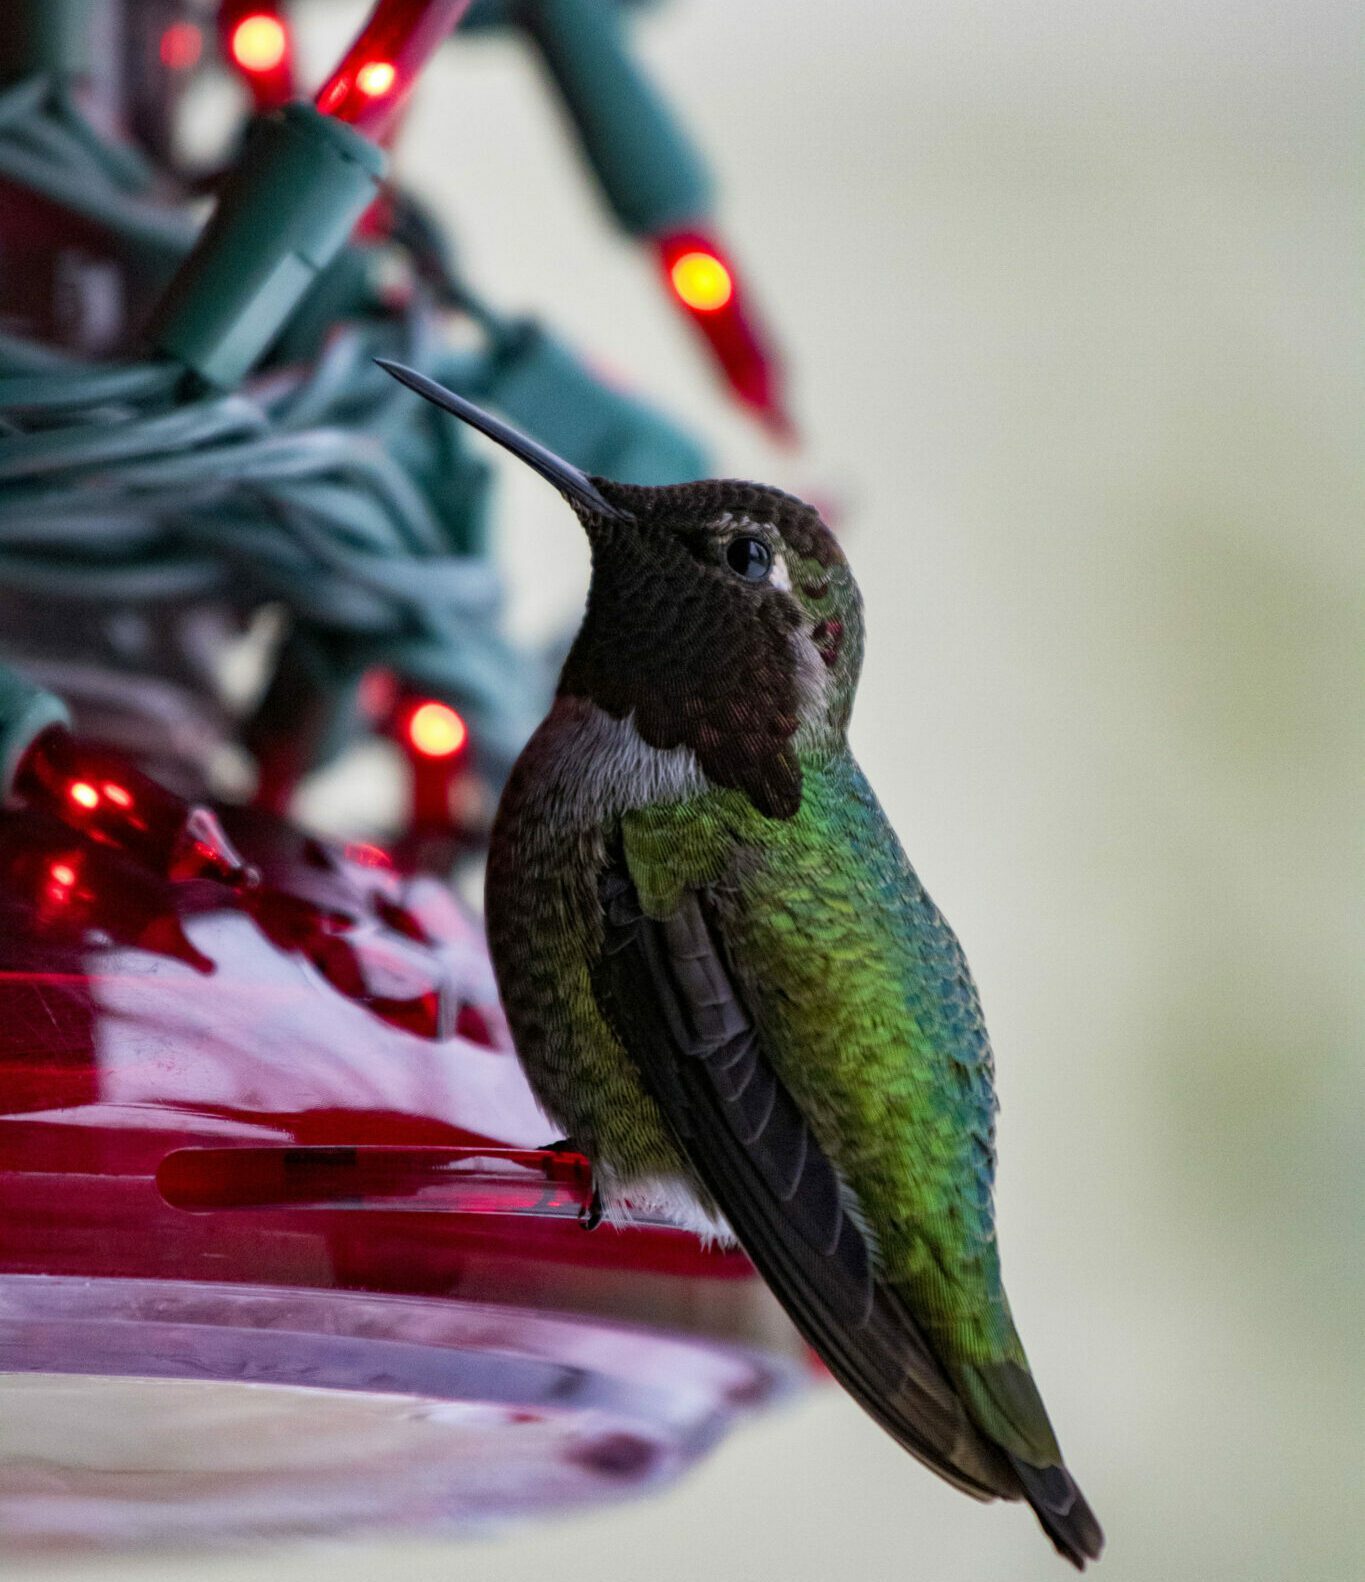 Hummingbird at a feeder wrapped in Christmas lights for winter